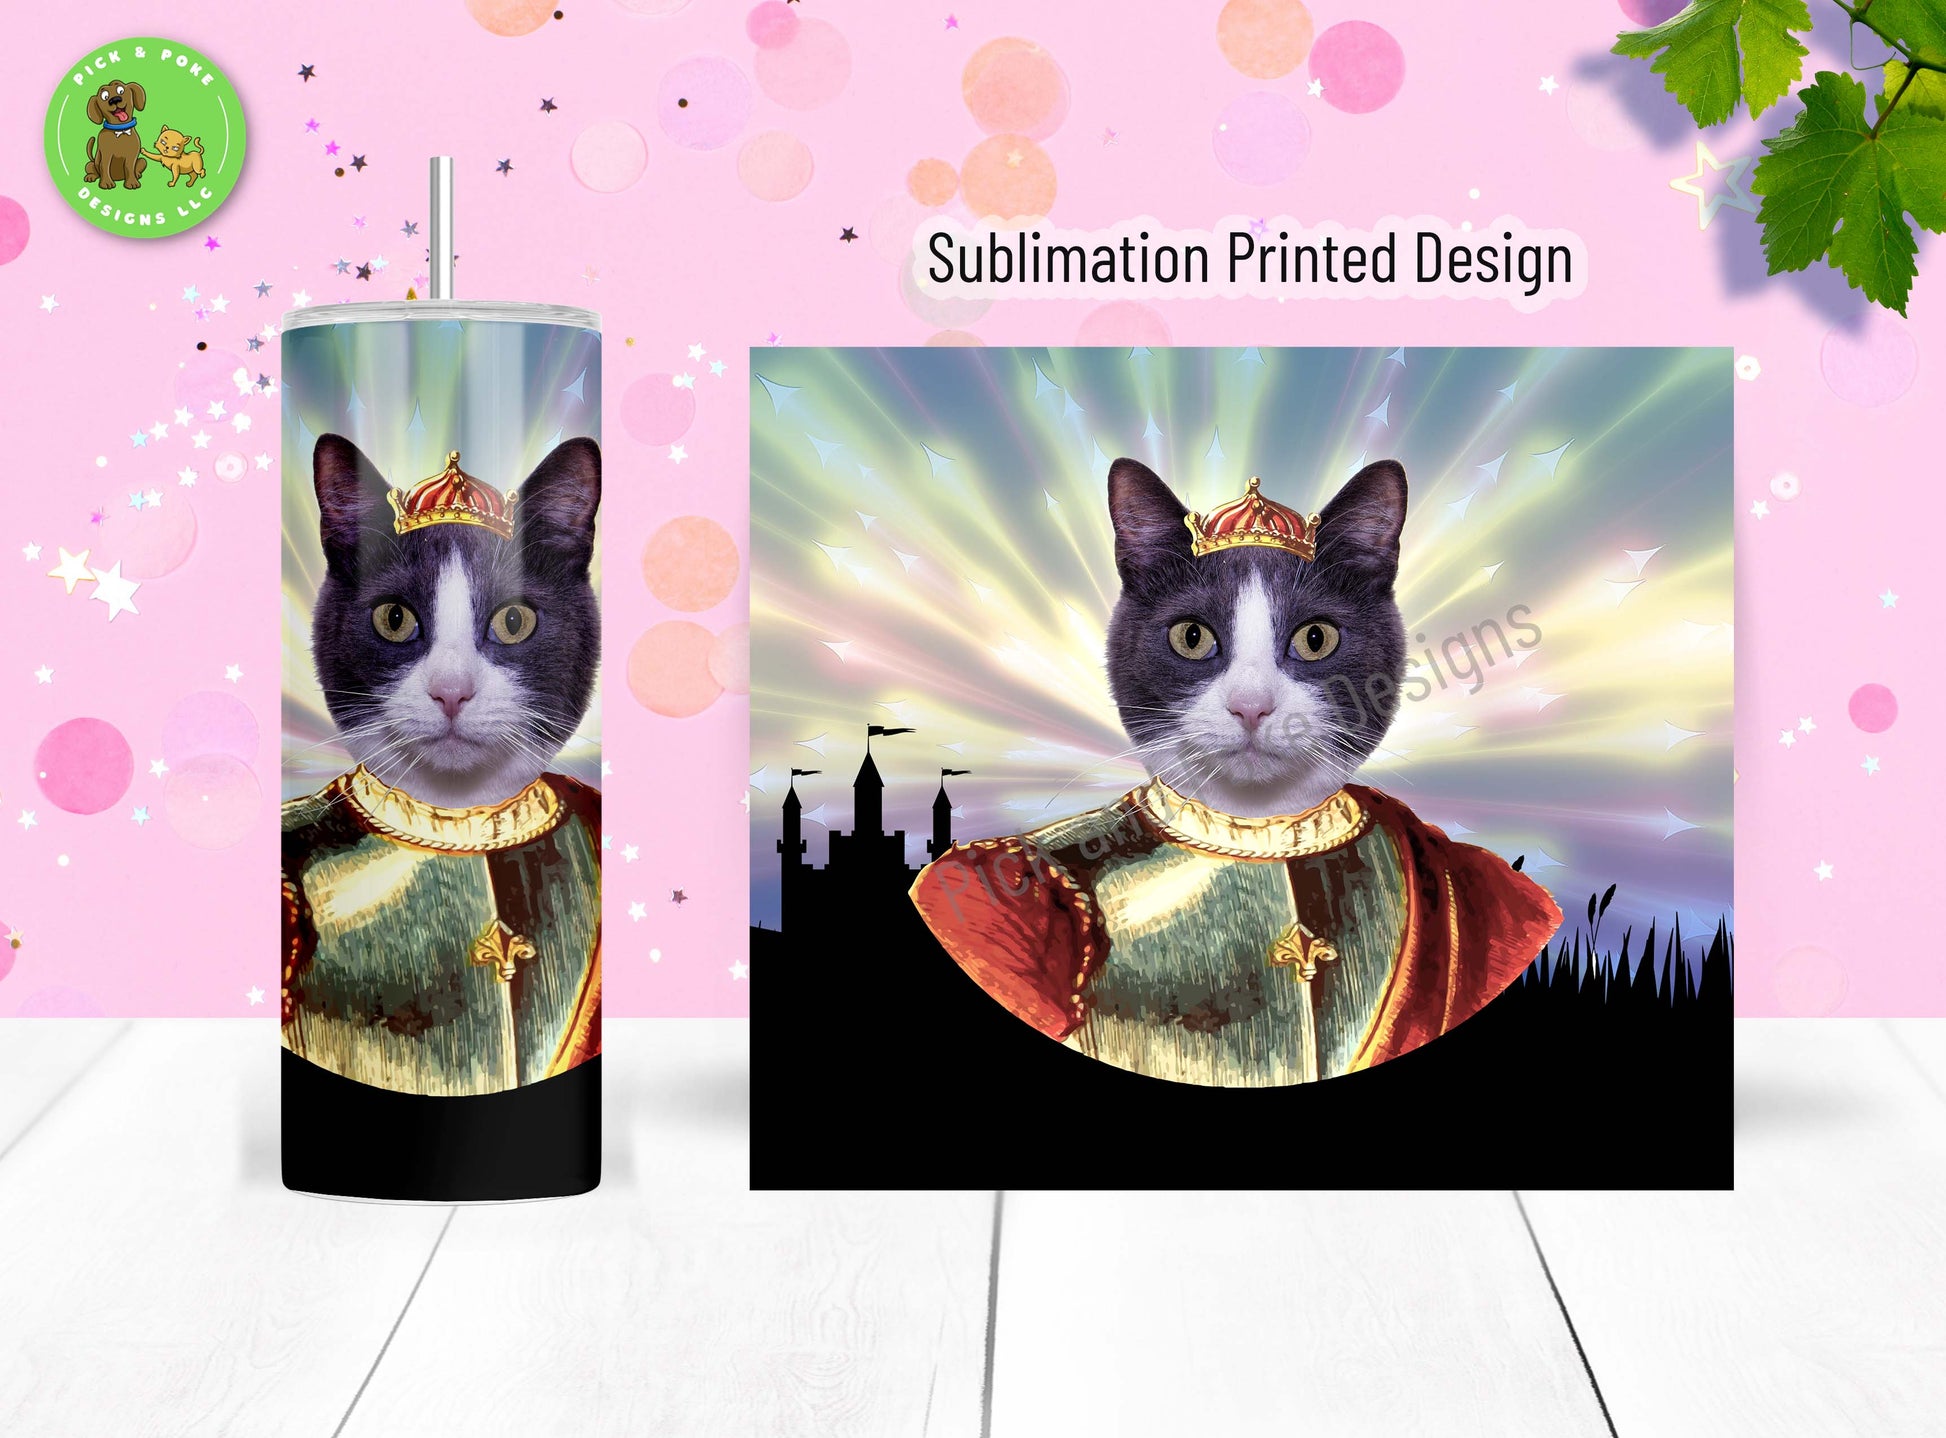 Tuxedo cat design is sublimated on a 20oz stainless steel tumbler